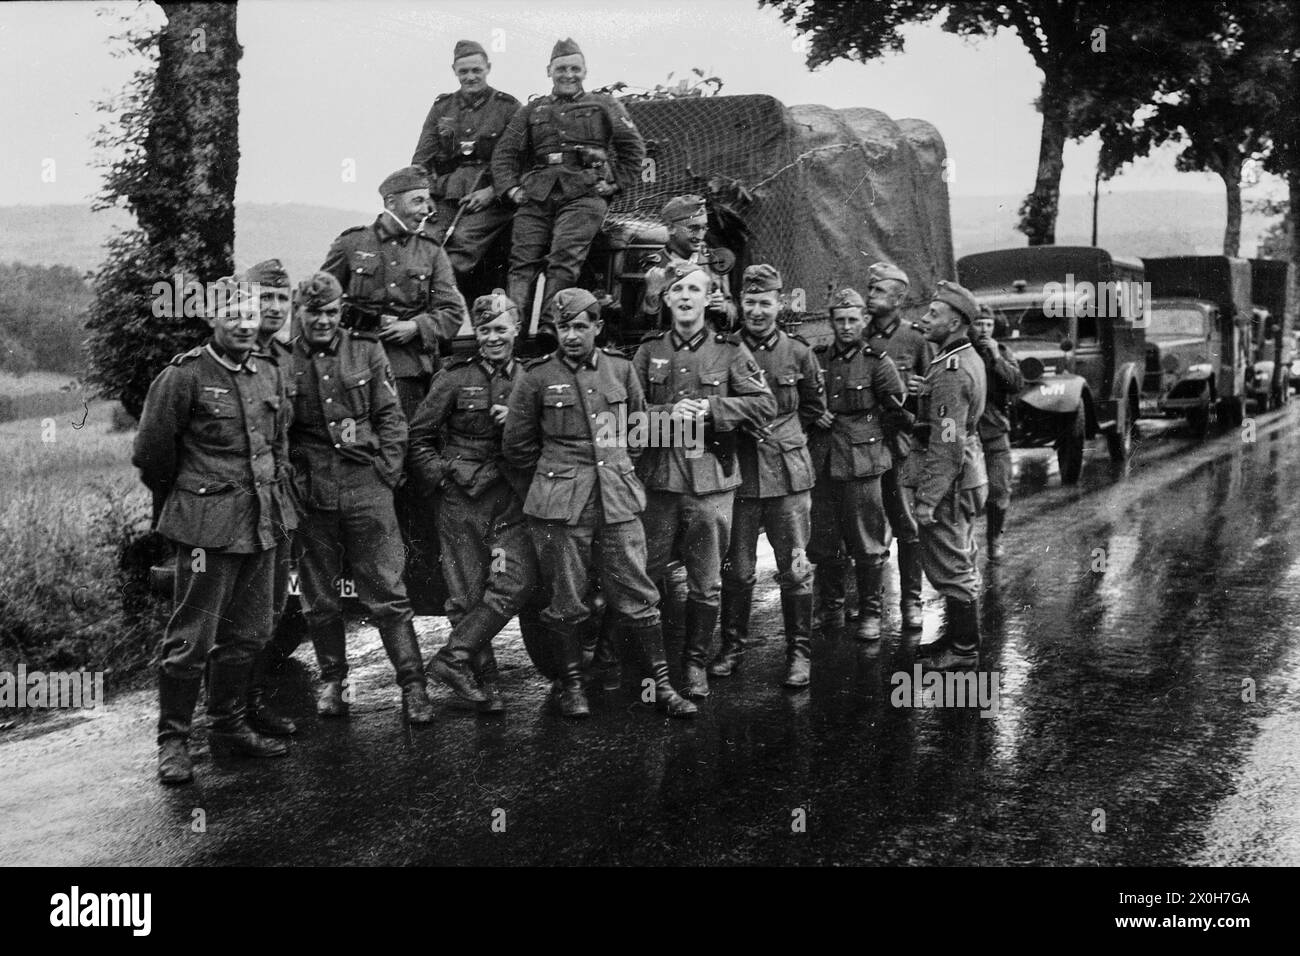 During a break in the march in France, the soldiers of a telecommunications unit pose for a group photo. The picture was taken by a member of the 154th Infantry Regiment / 58th Infantry Division, in France. [automated translation] Stock Photo